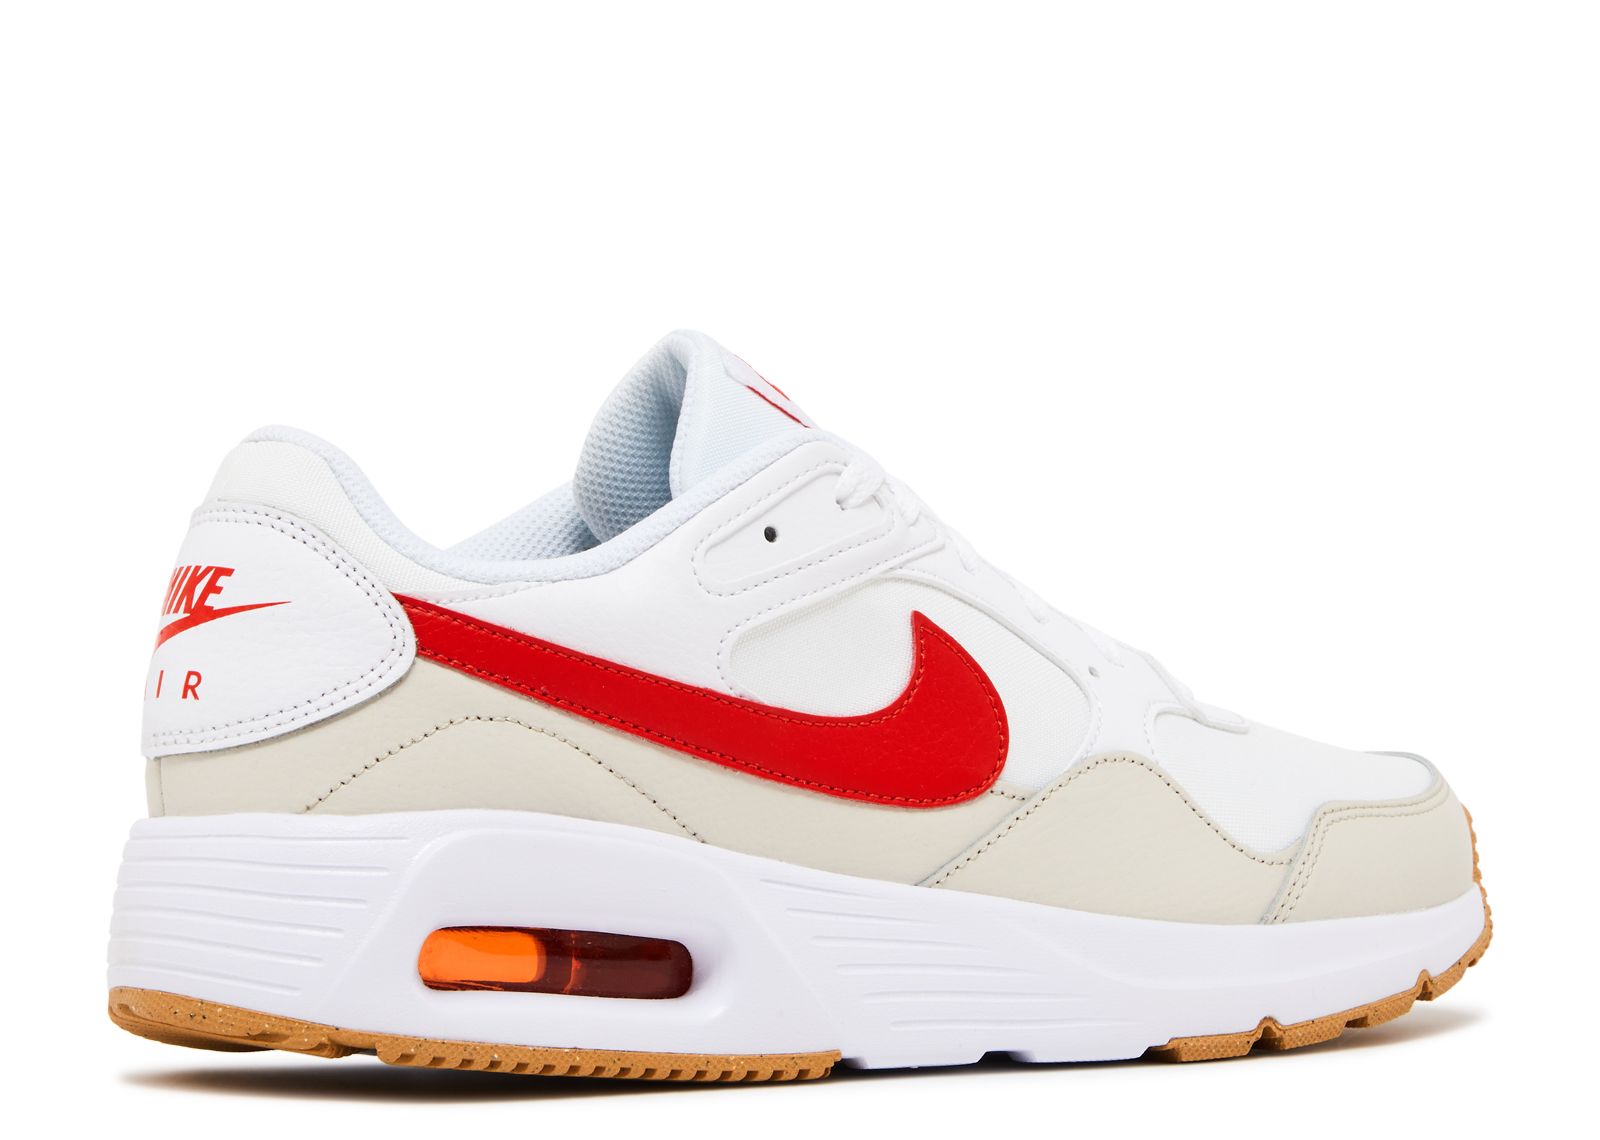 Air Max SC \'White Picante Red\' - Nike - CW4555 112 - white/light orewood  brown/gum light brown/picante red | Flight Club | Sneaker low